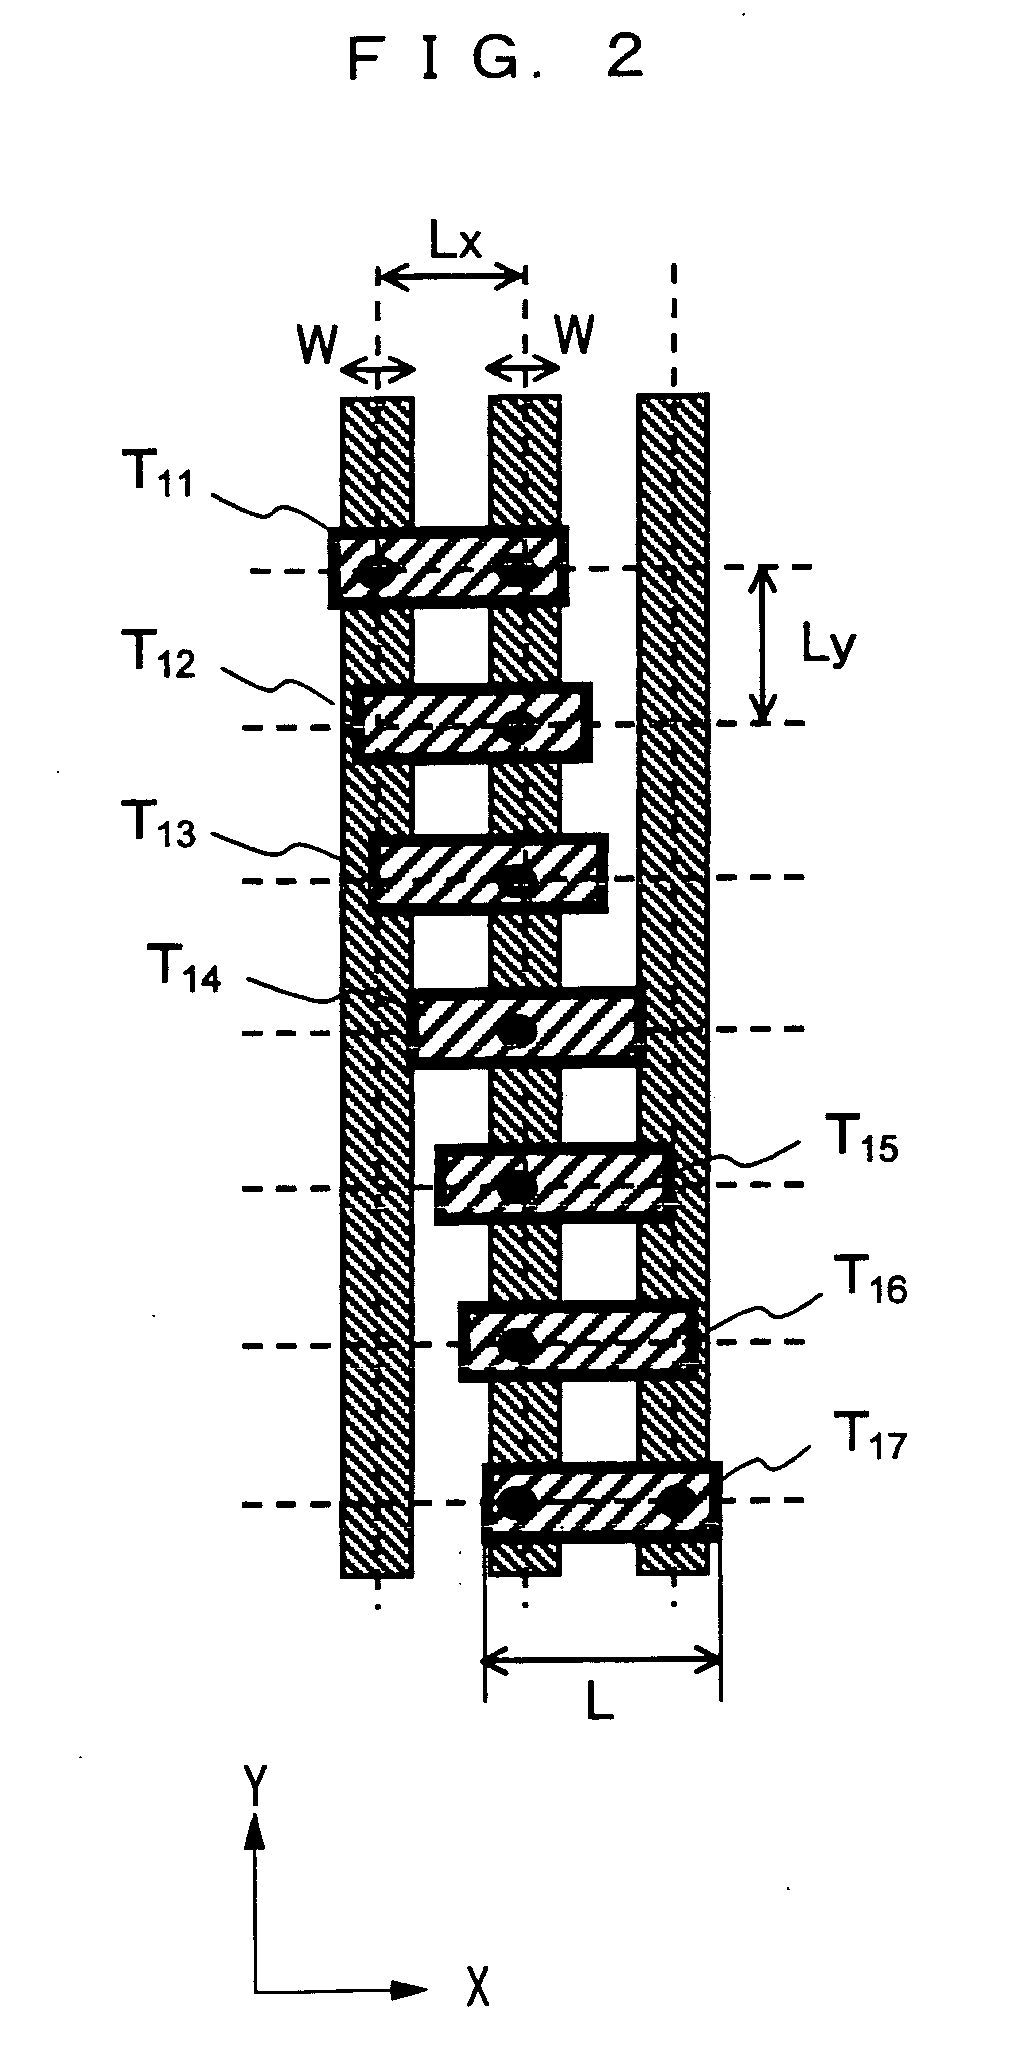 Cell, standard cell, standard cell library, a placement method using standard cell, and a semiconductor integrated circuit